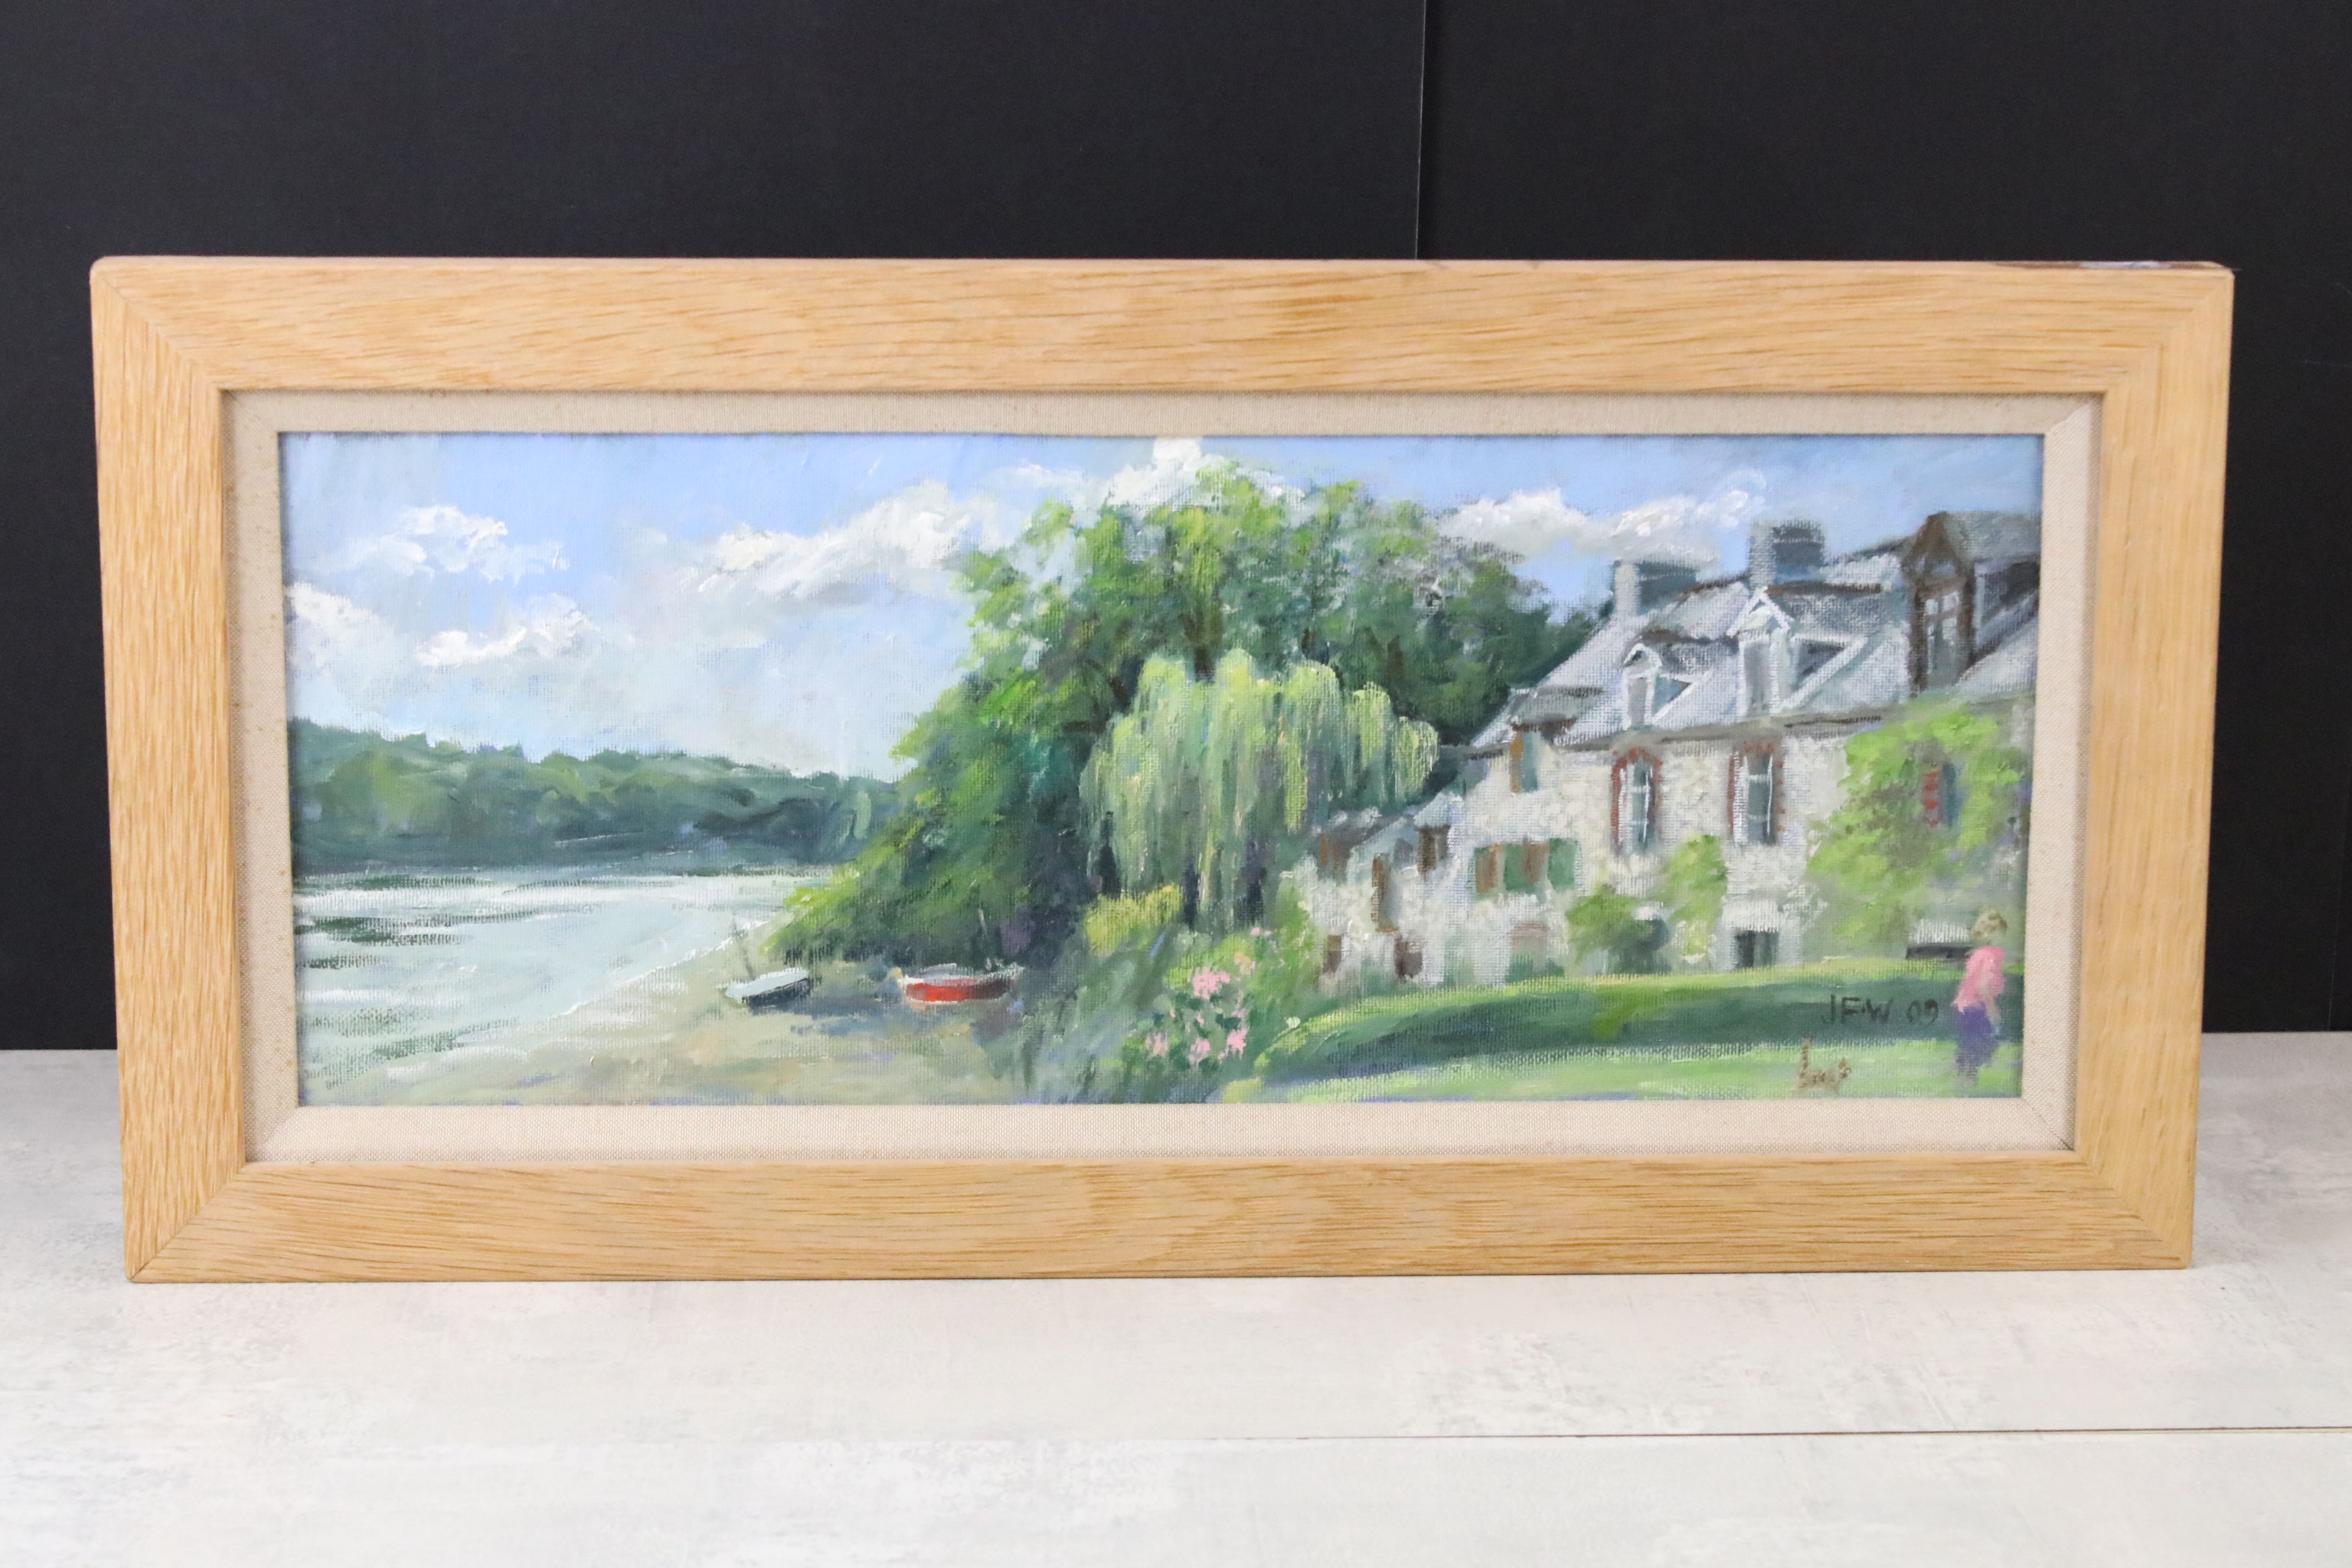 JFW Oil on Board, Impressionist Estuary View with Woman by Country House, label on verso Booths